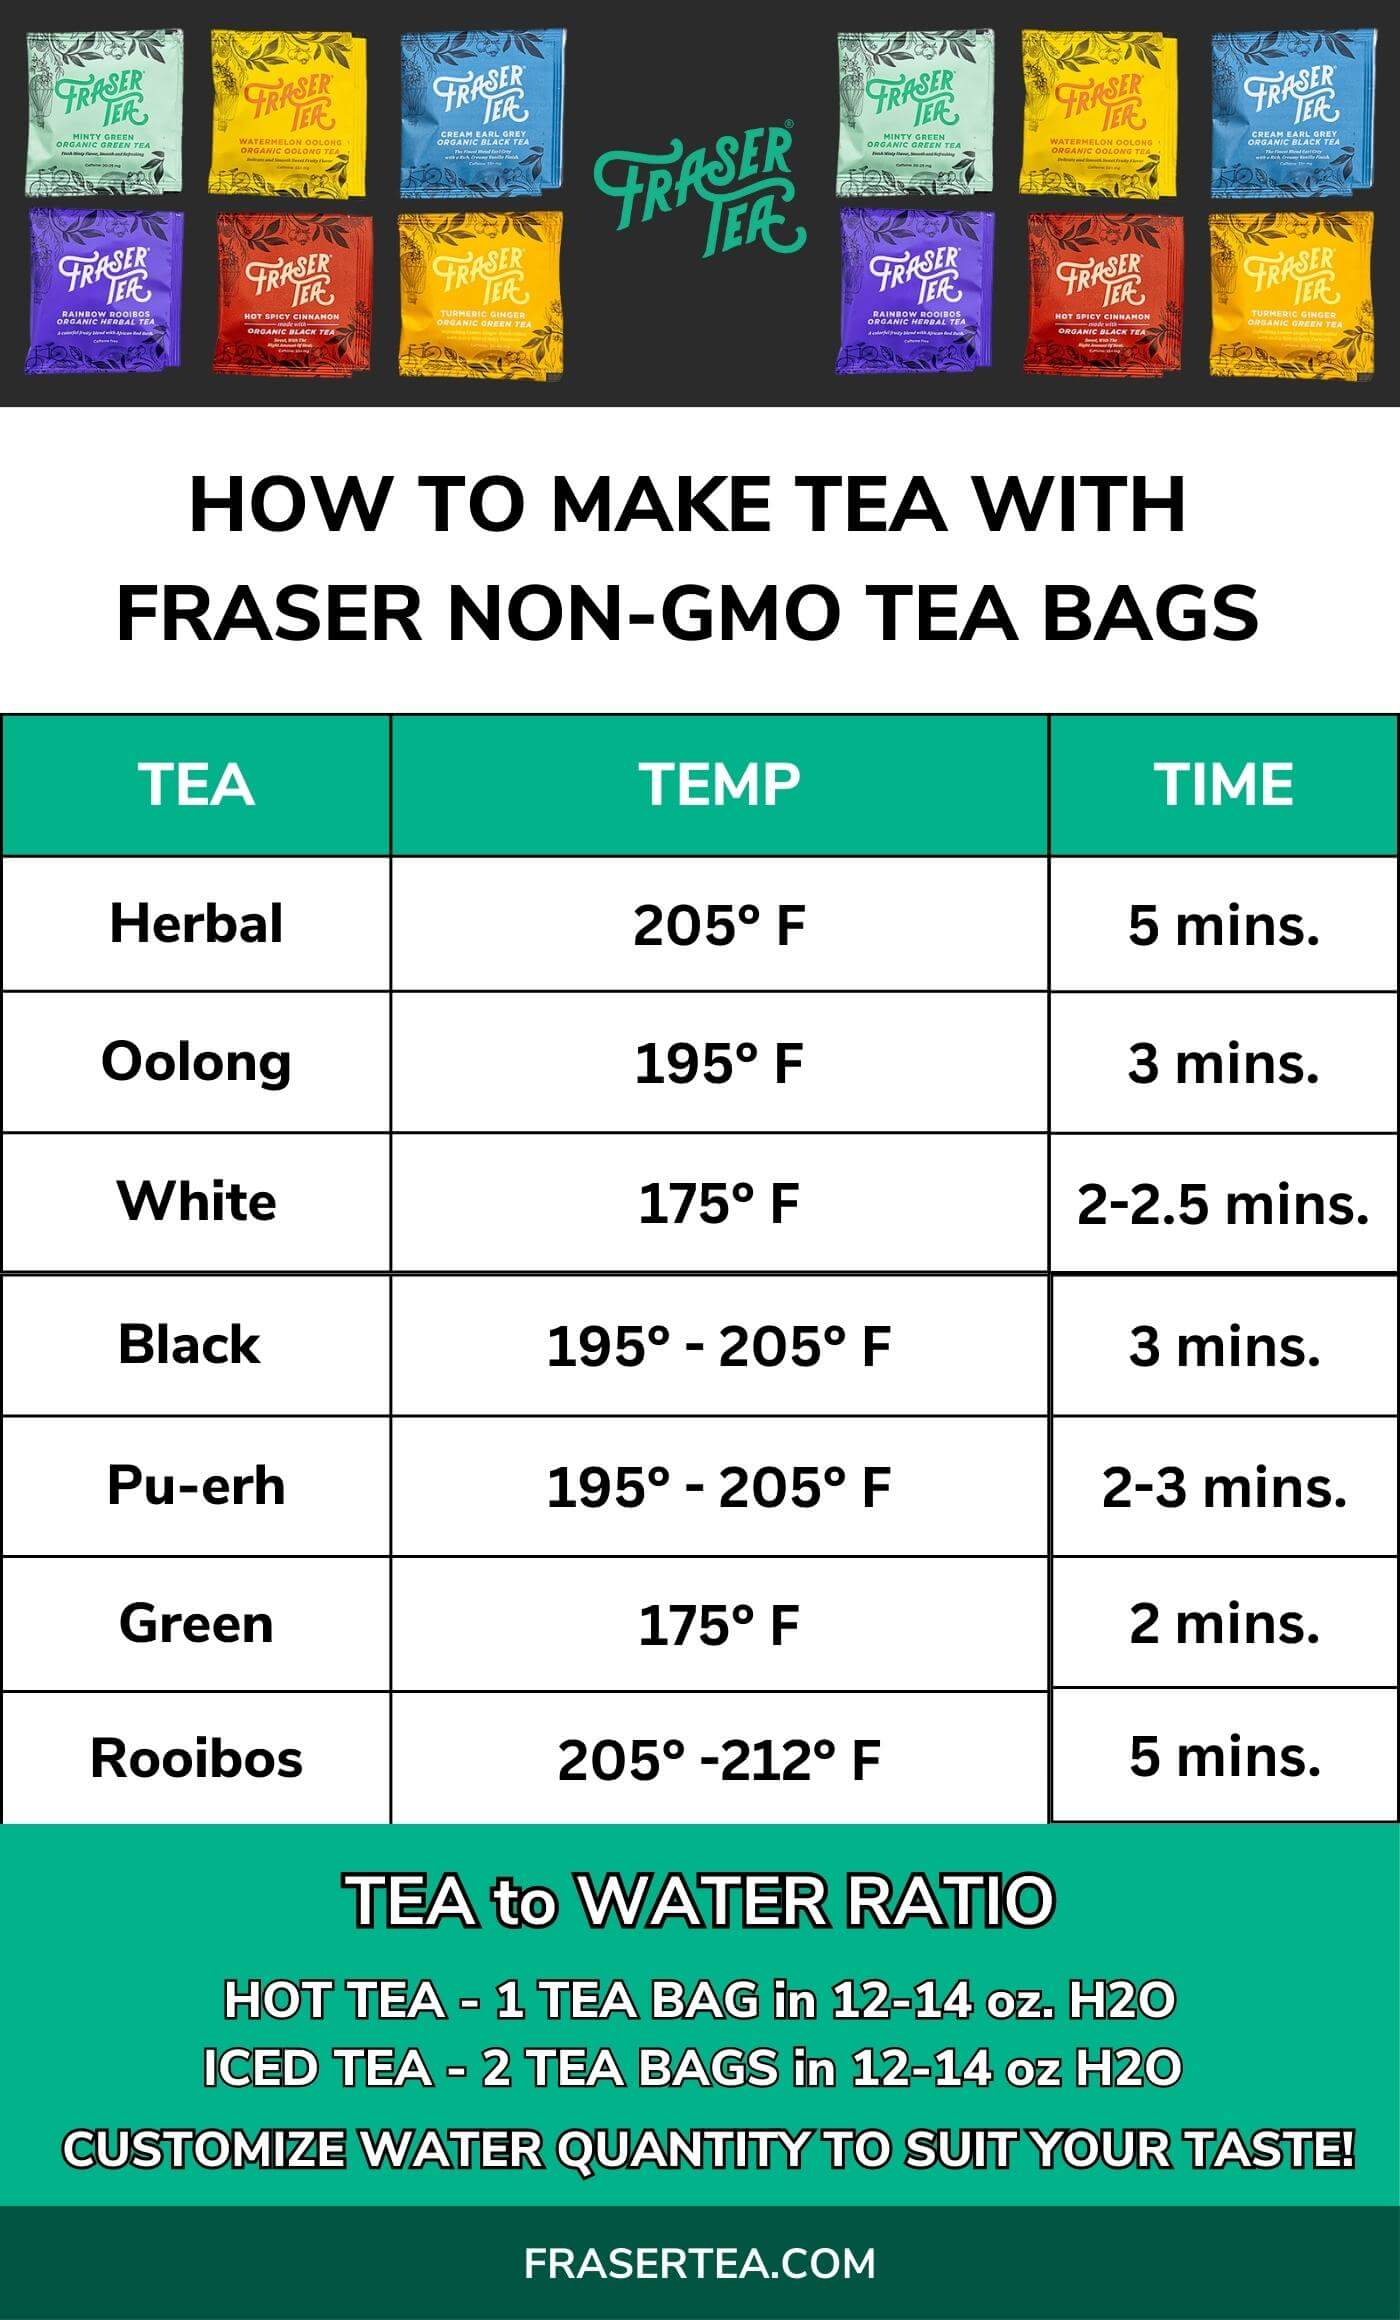 How to Brew tea bags with Fraser Tea infographic showing temperature, time.